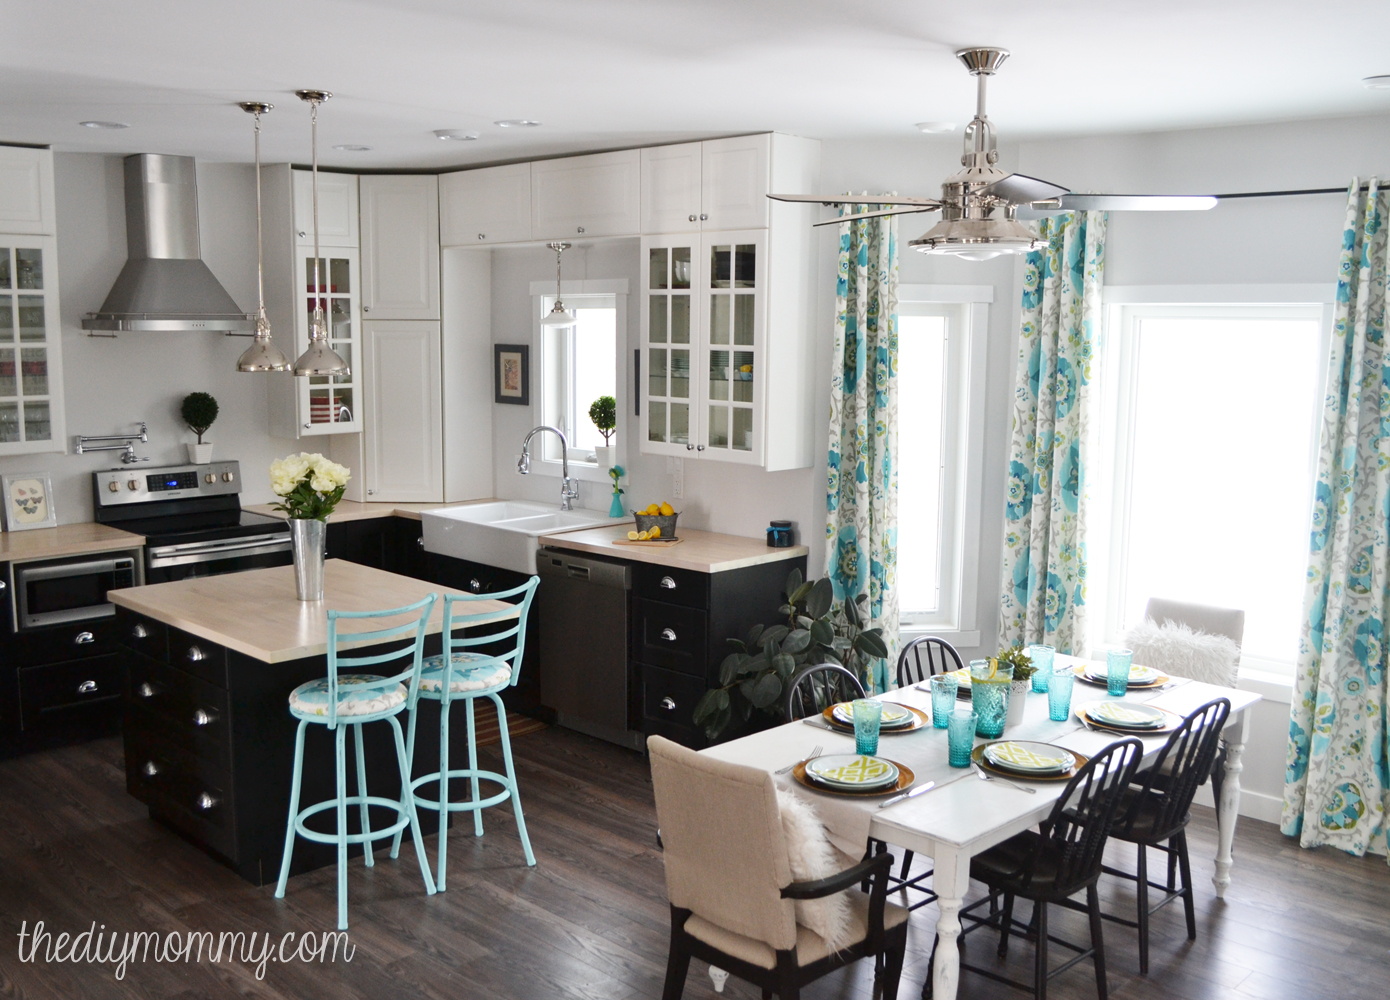 A black, white & turquoise vintage industrial kitchen filled with budget friendly DIY ideas.